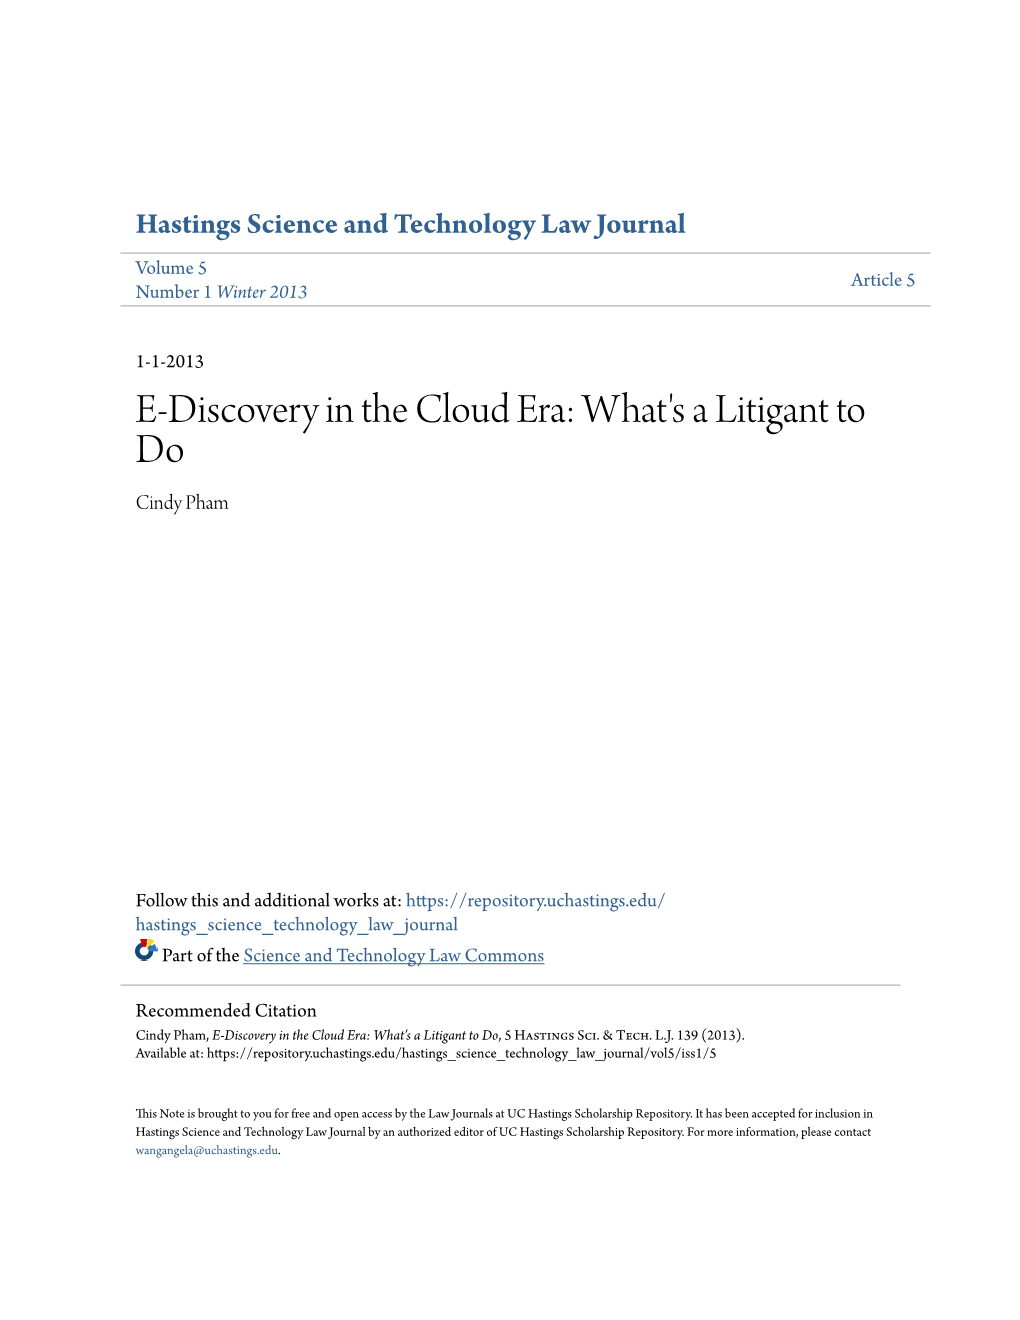 E-Discovery in the Cloud Era: What's a Litigant to Do Cindy Pham